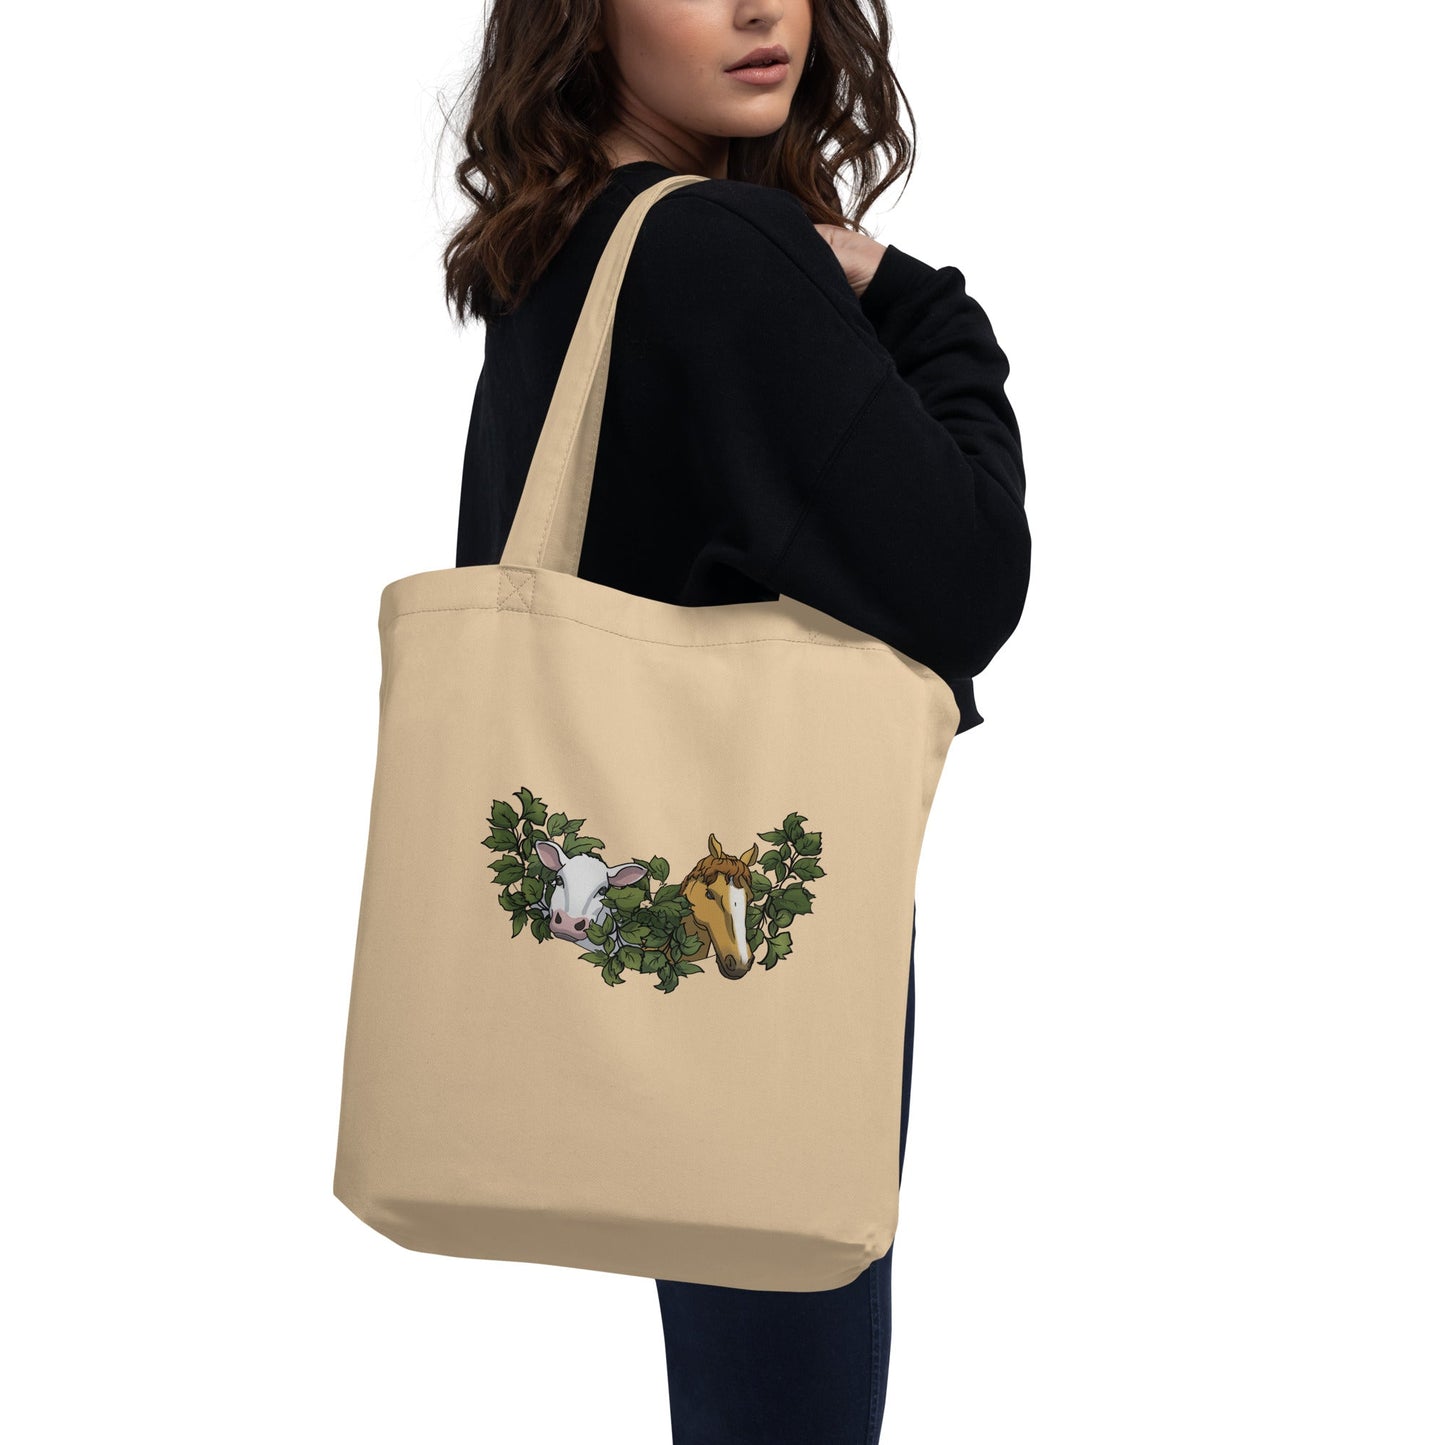 Cattle Tote Bag